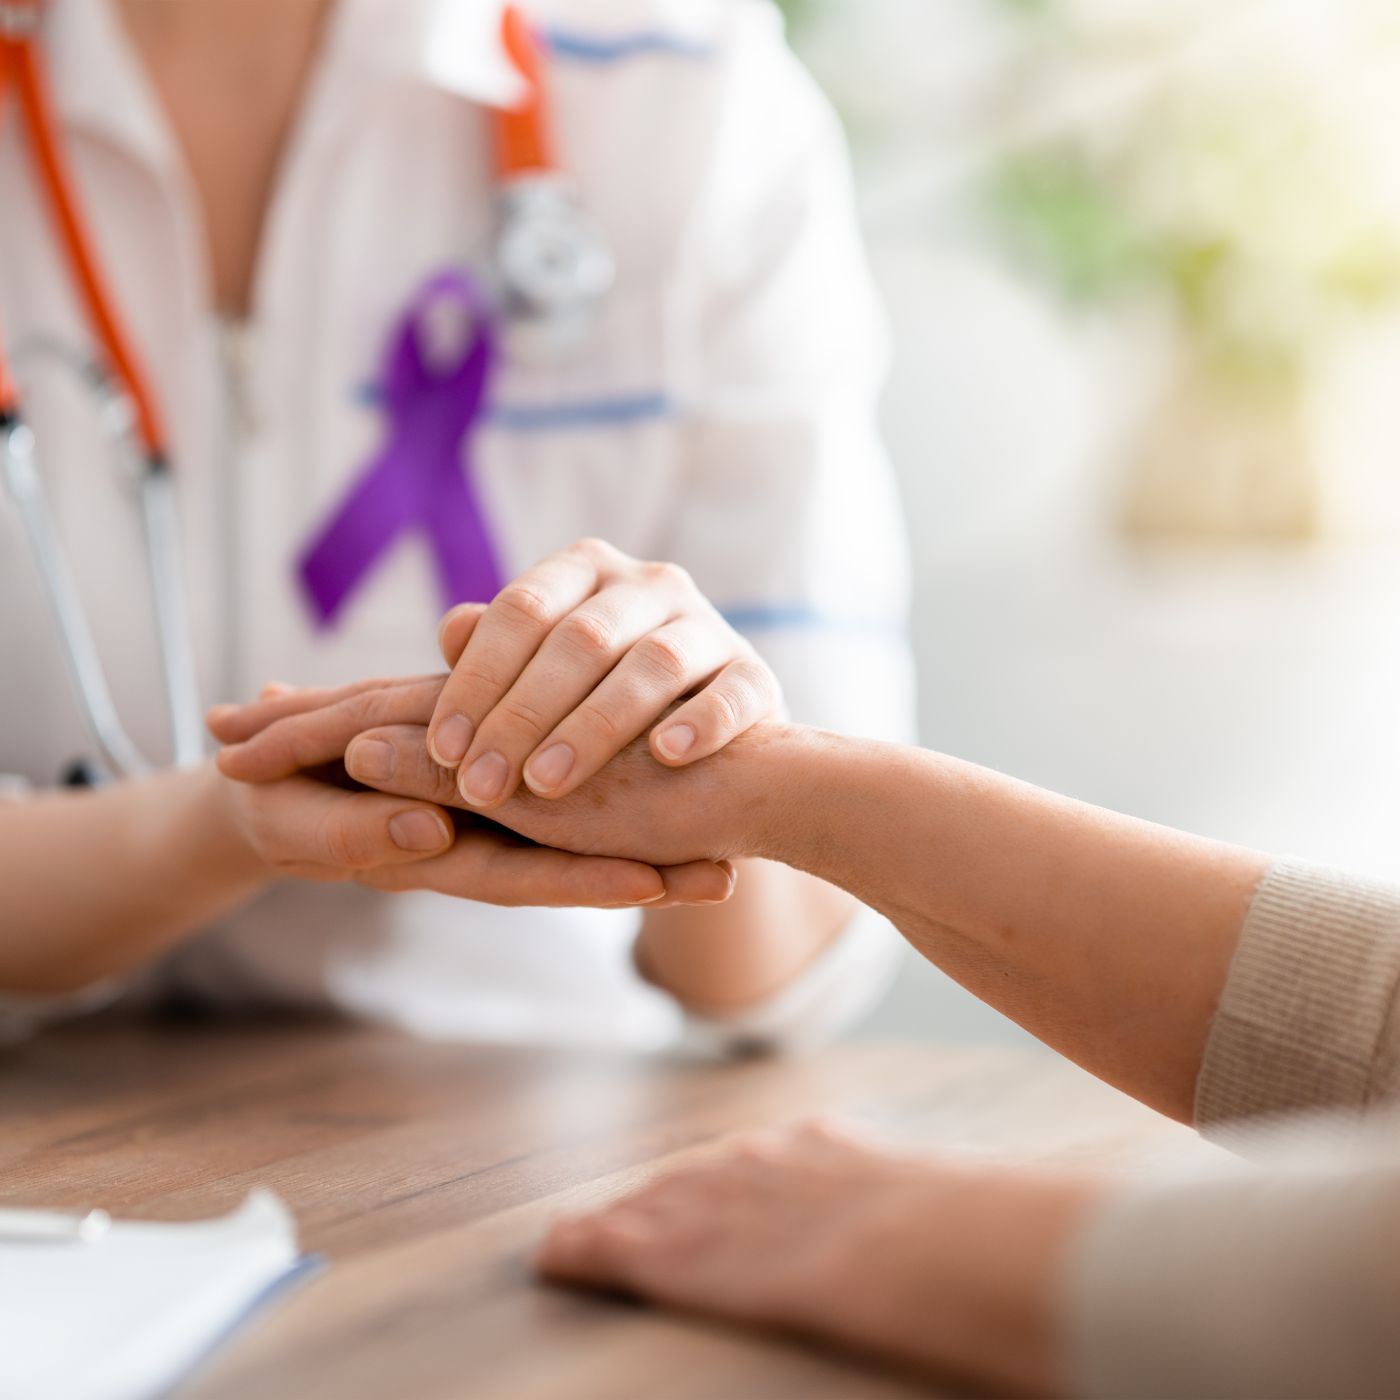 Close-up image of a doctor's hand, wearing a purple ribbon for cancer awareness, gently holding a patient's hand. conveys empathy and support,